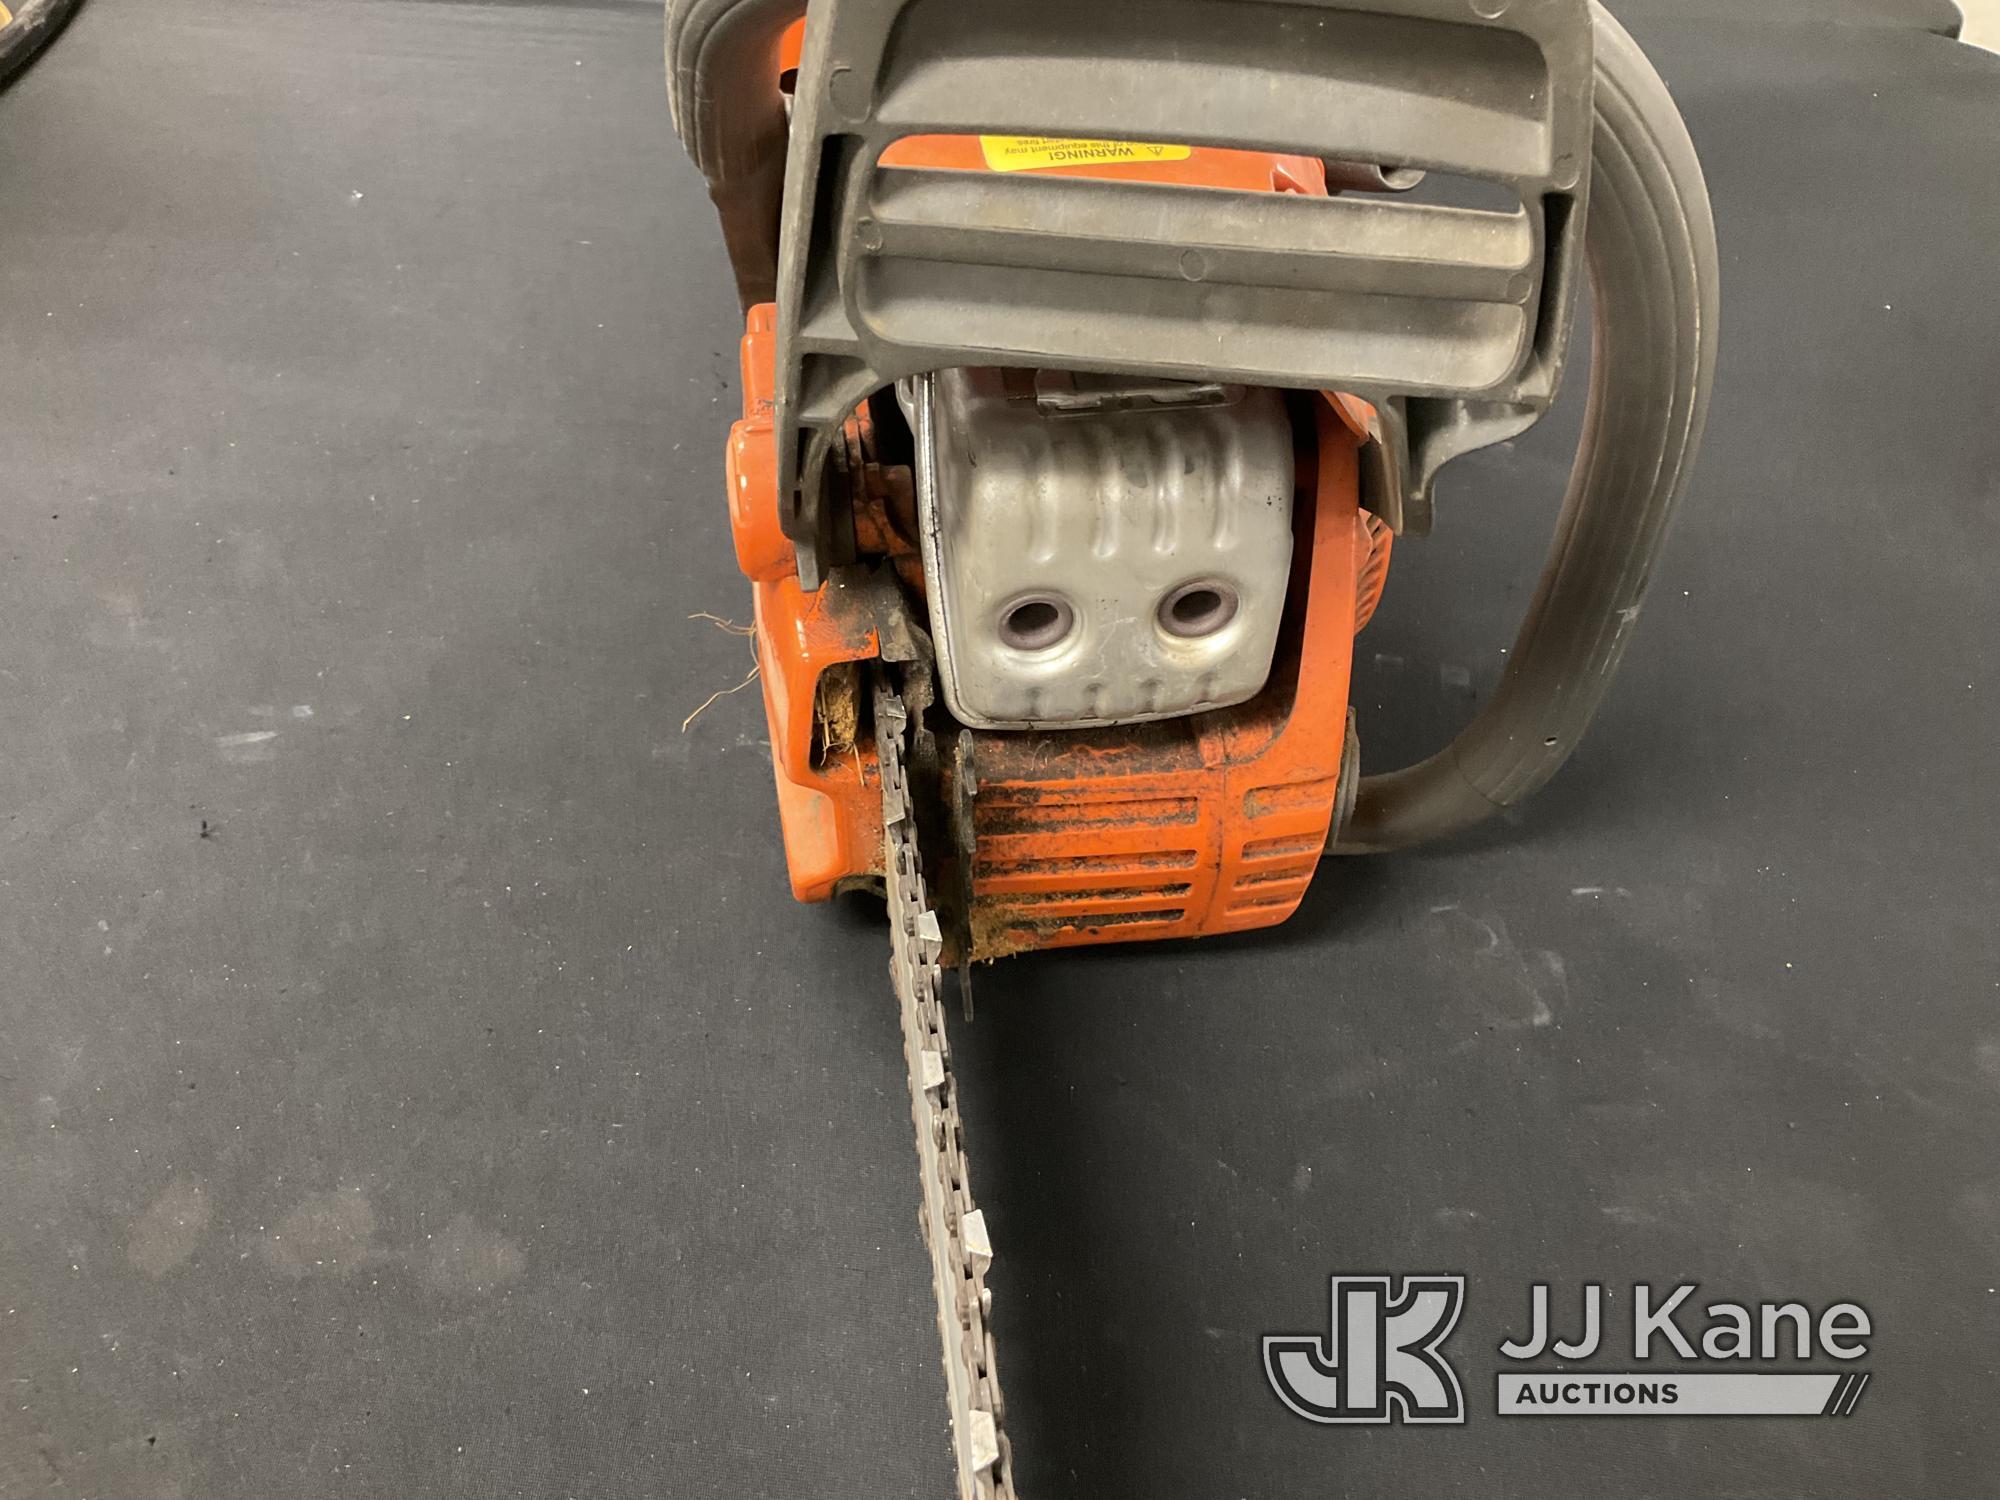 (Jurupa Valley, CA) Chainsaw (Used) NOTE: This unit is being sold AS IS/WHERE IS via Timed Auction a